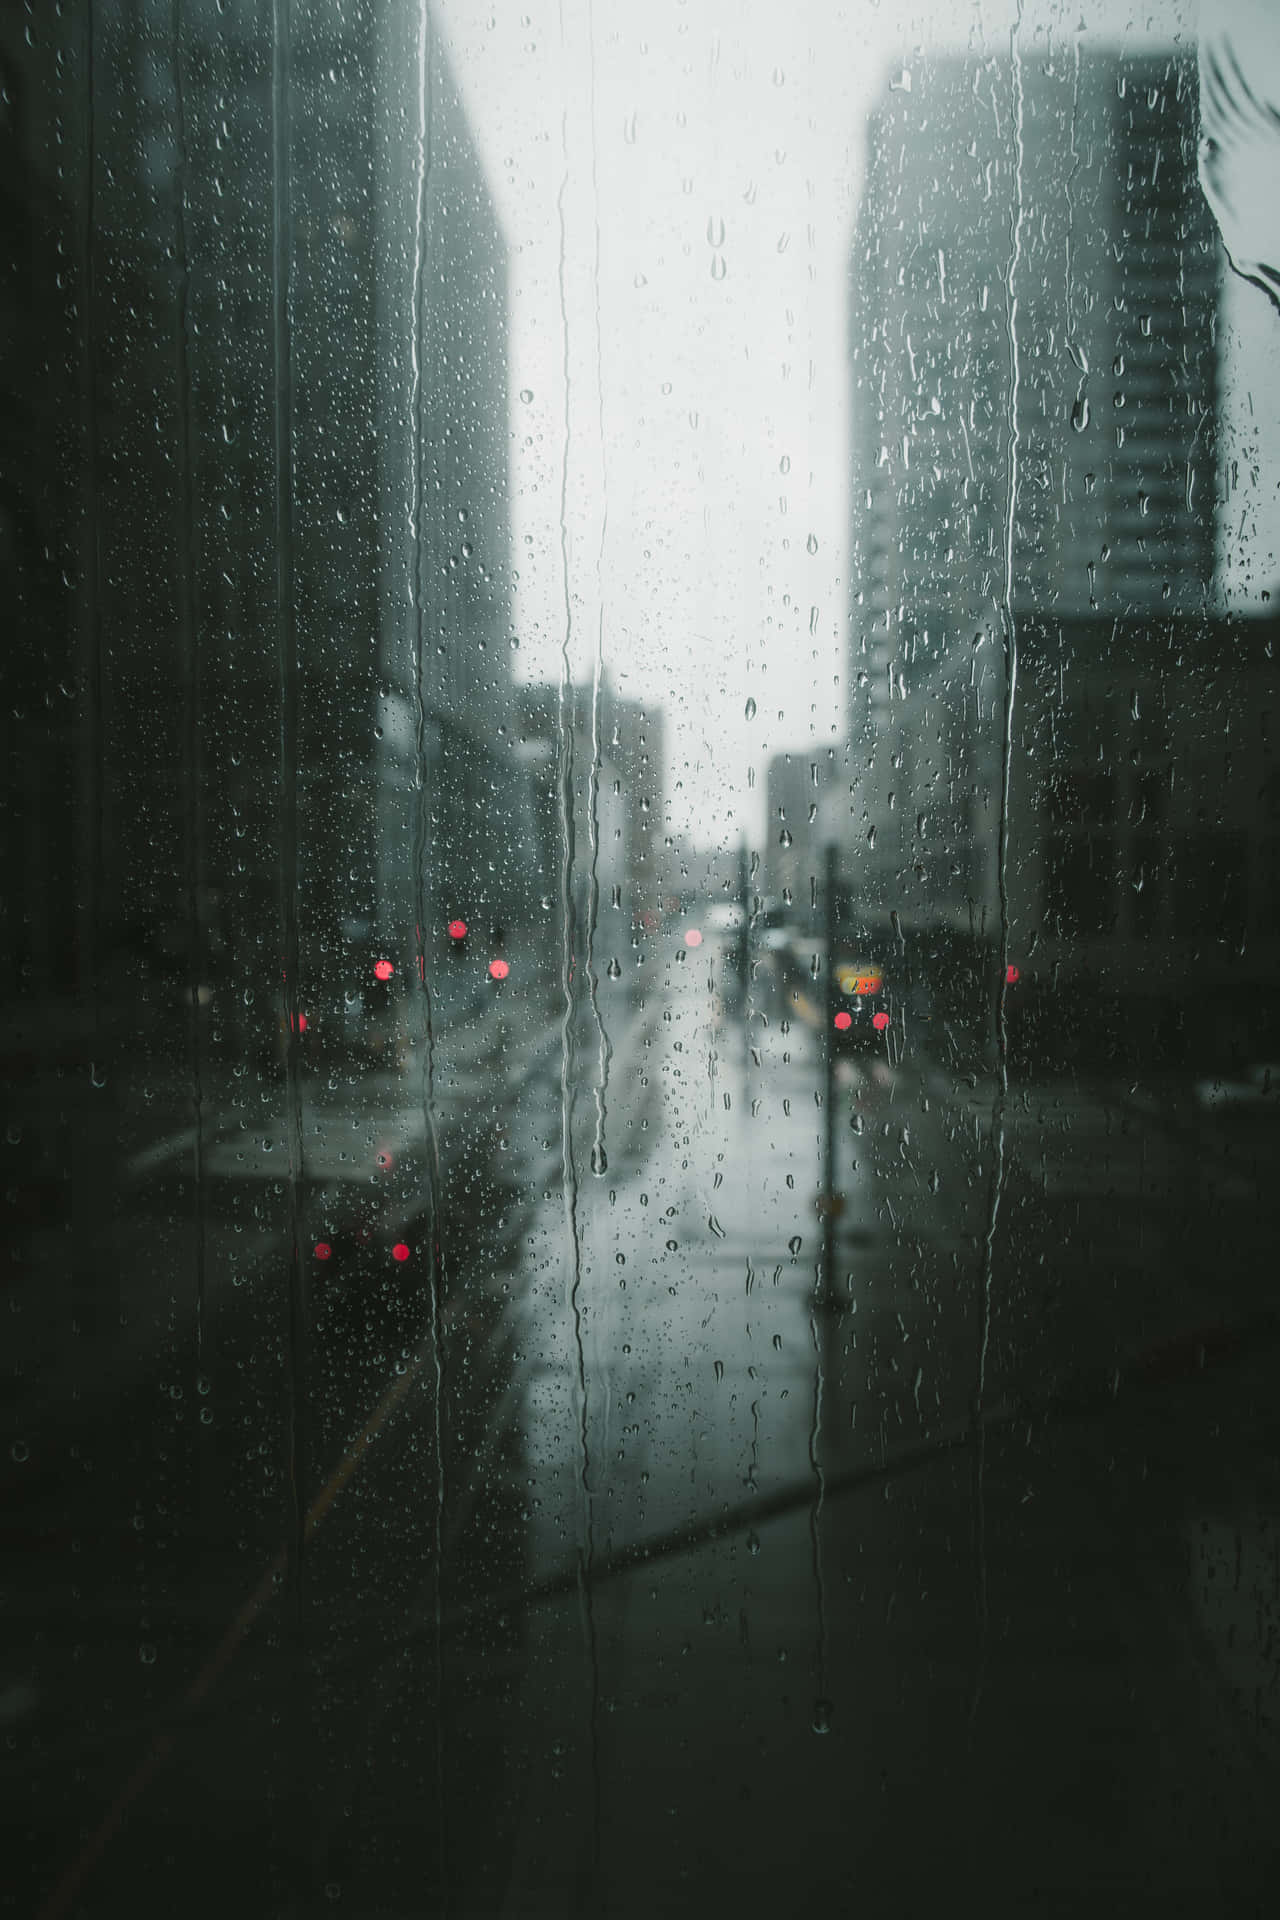 Capturing The Calm: Rainfall In The City